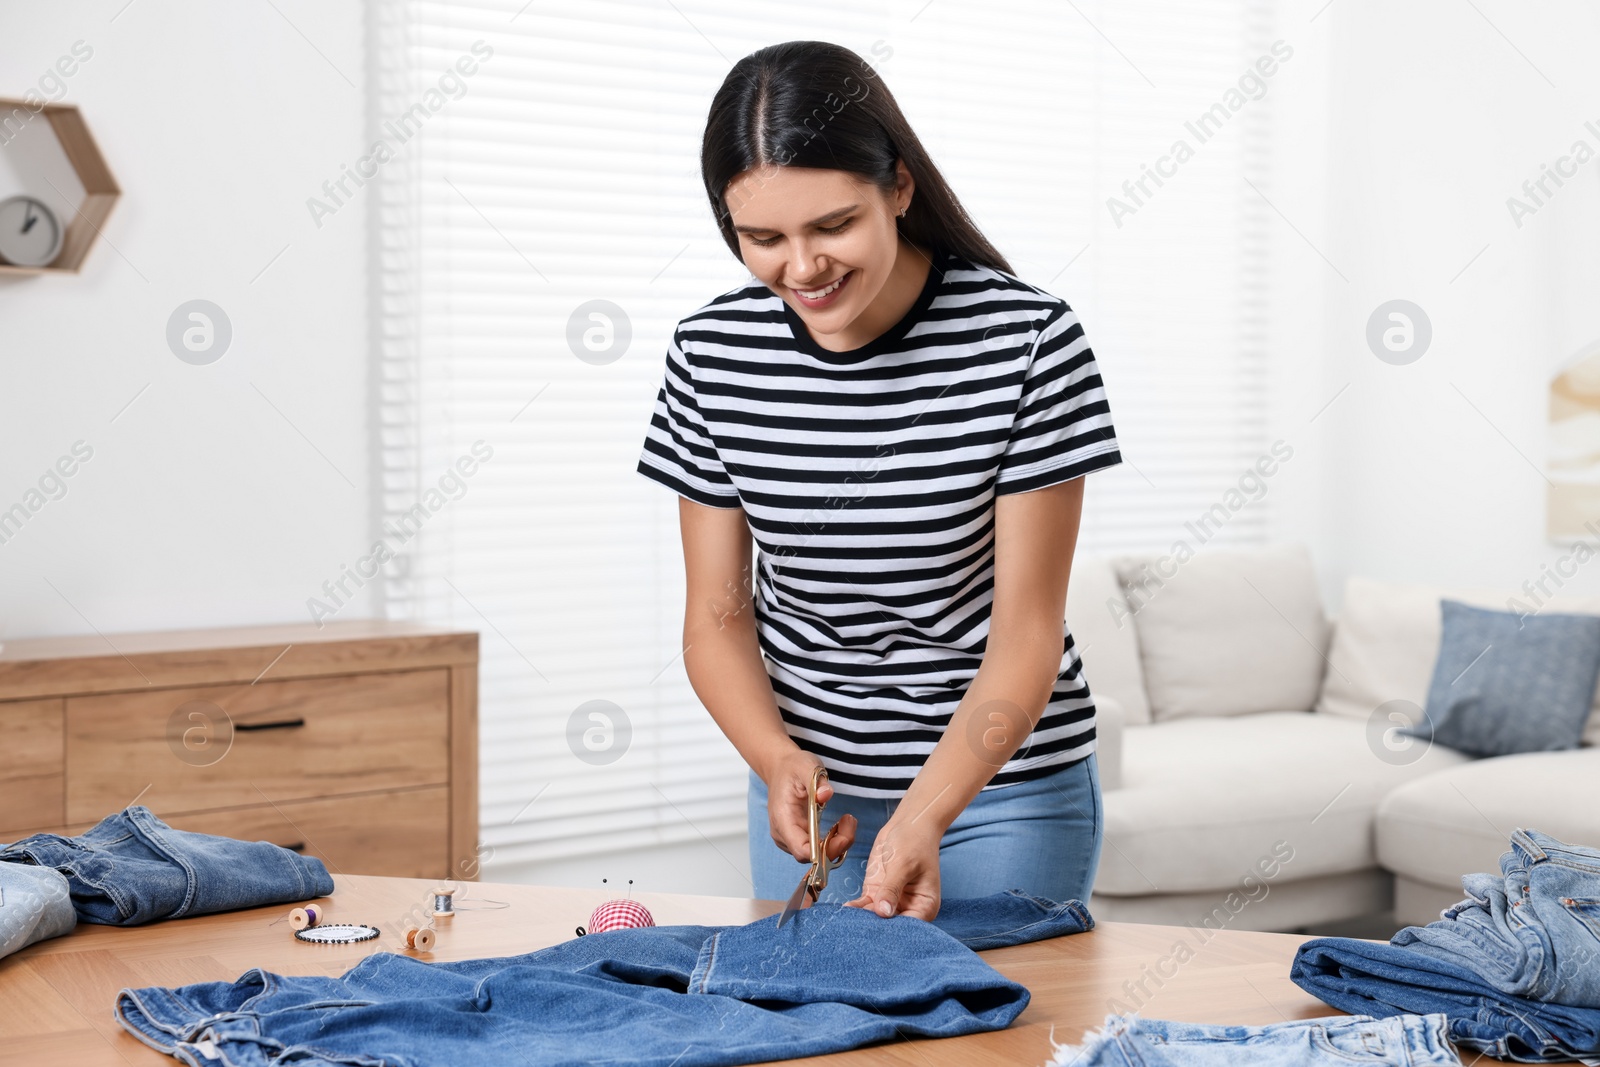 Photo of Young woman cutting jeans with scissors at wooden table indoors